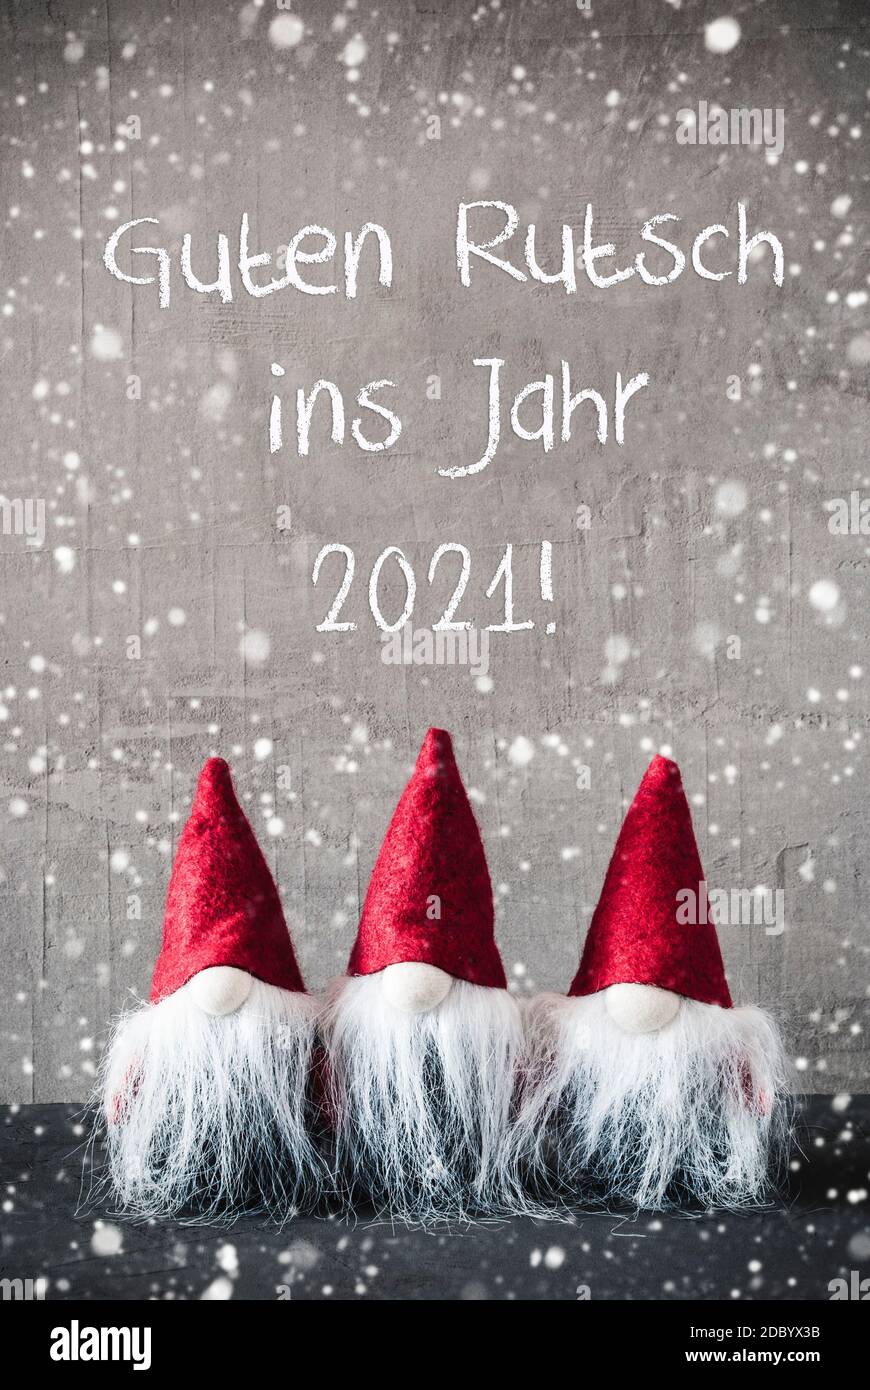 Three Gray Gnomes With English Text Guten Rutsch Ins Jahr 2021 Means Happy New Year And Red Jelly Bag Cap. Urban Cement Background With Snowflakes. Ve Stock Photo